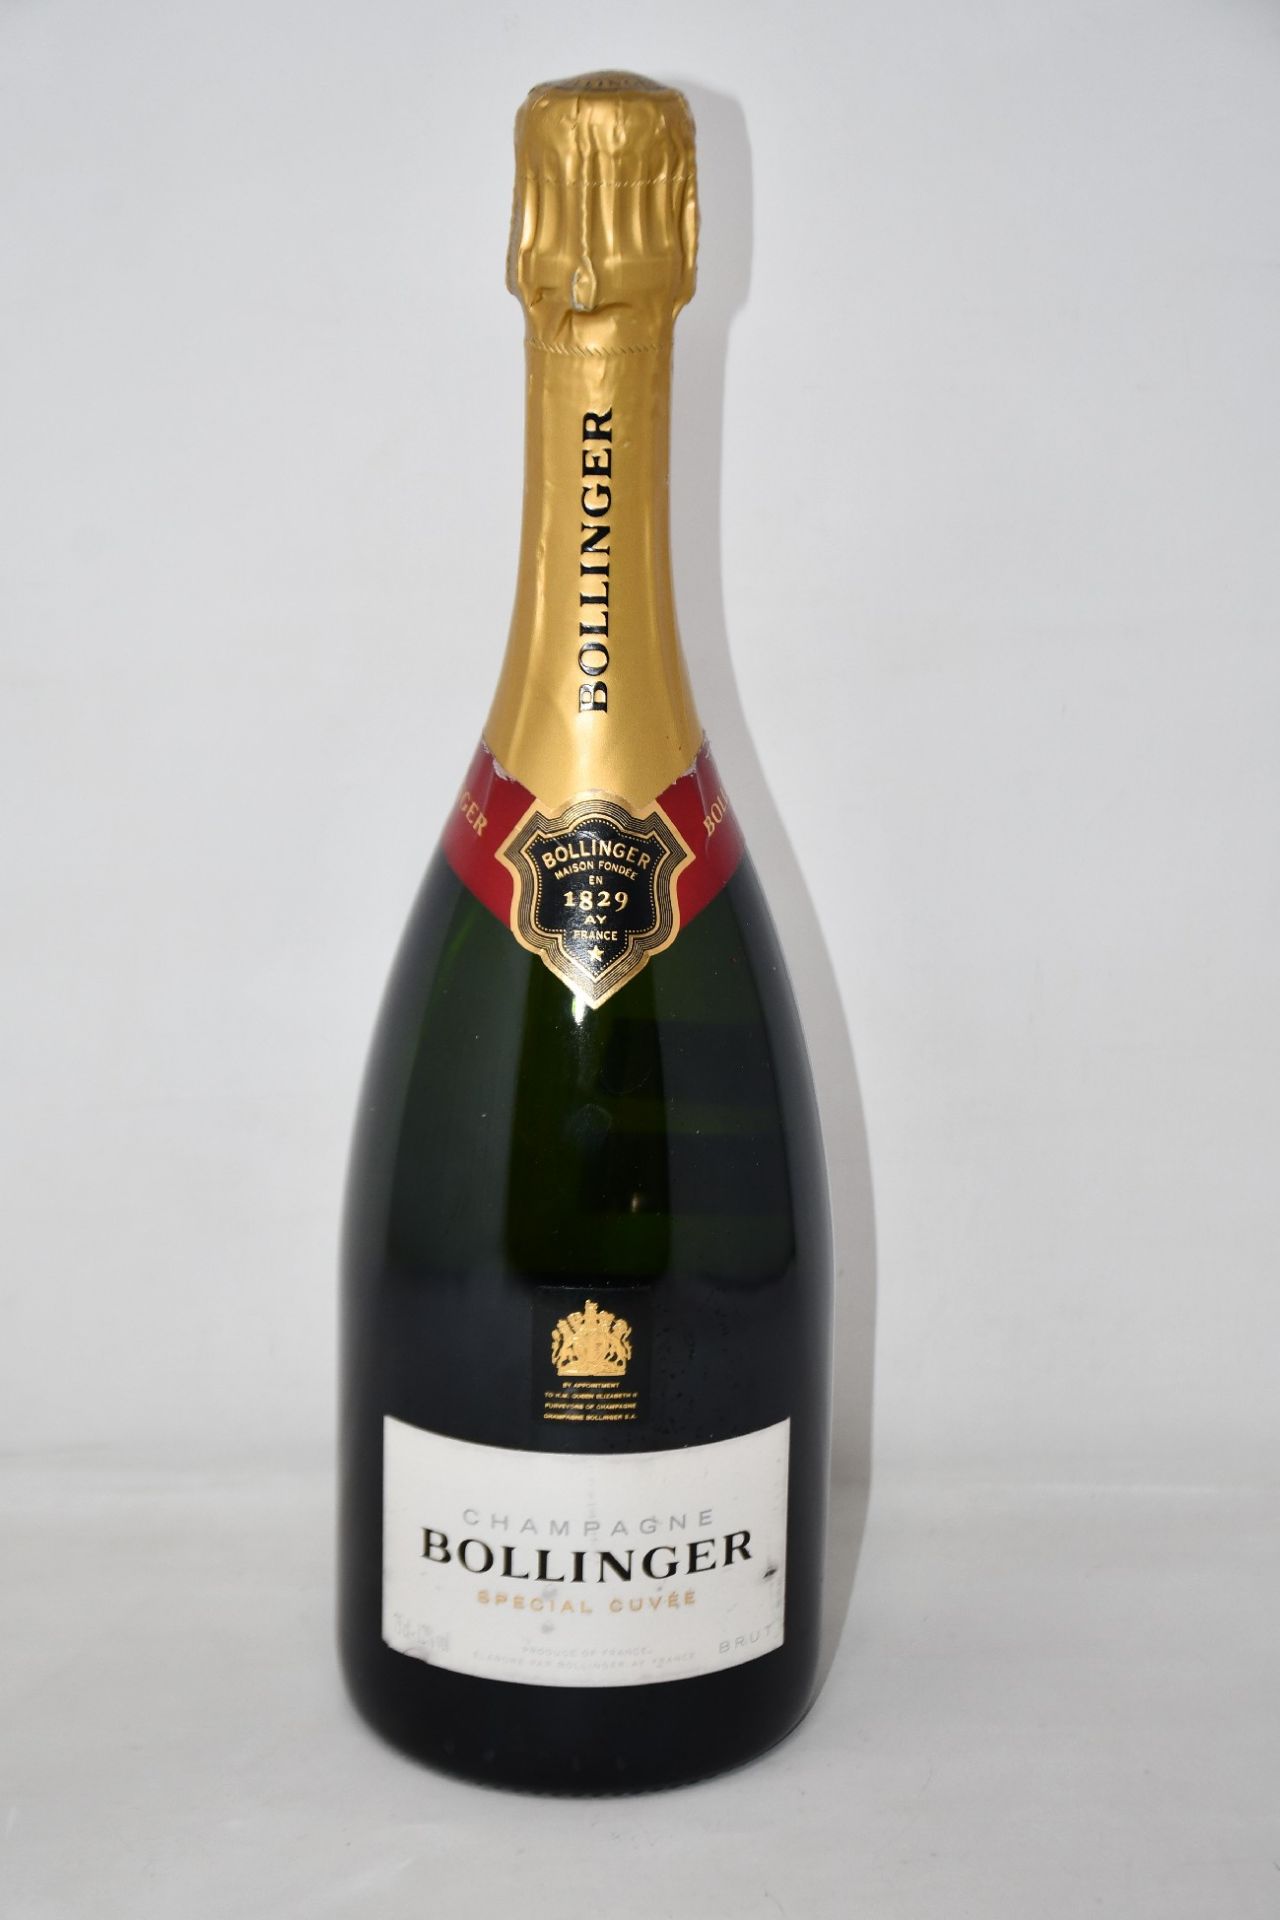 Six bottles of Bollinger Special Cuvee champagne (750ml) (Over 18s only).